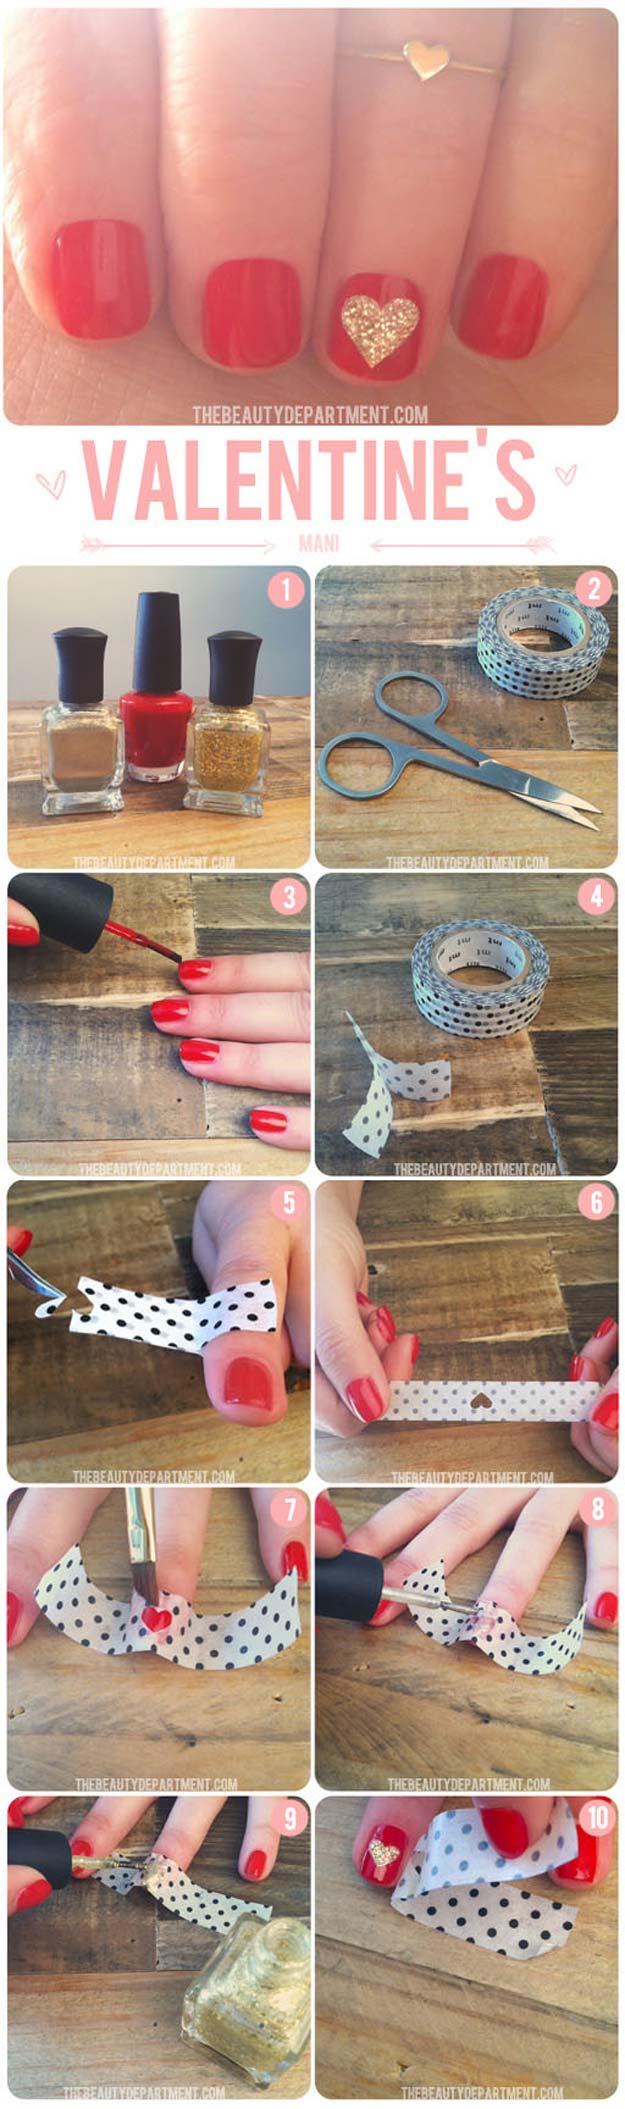 Valentine Nail Art Ideas - Washi Tape Glitter Heart - Cute and Cool Looks For Valentines Day Nails - Hearts, Gradients, Red, Black and Pink Designs - Easy Ideas for DIY Manicures with Step by Step Tutorials - Fun Ideas for Teens, Teenagers and Women 